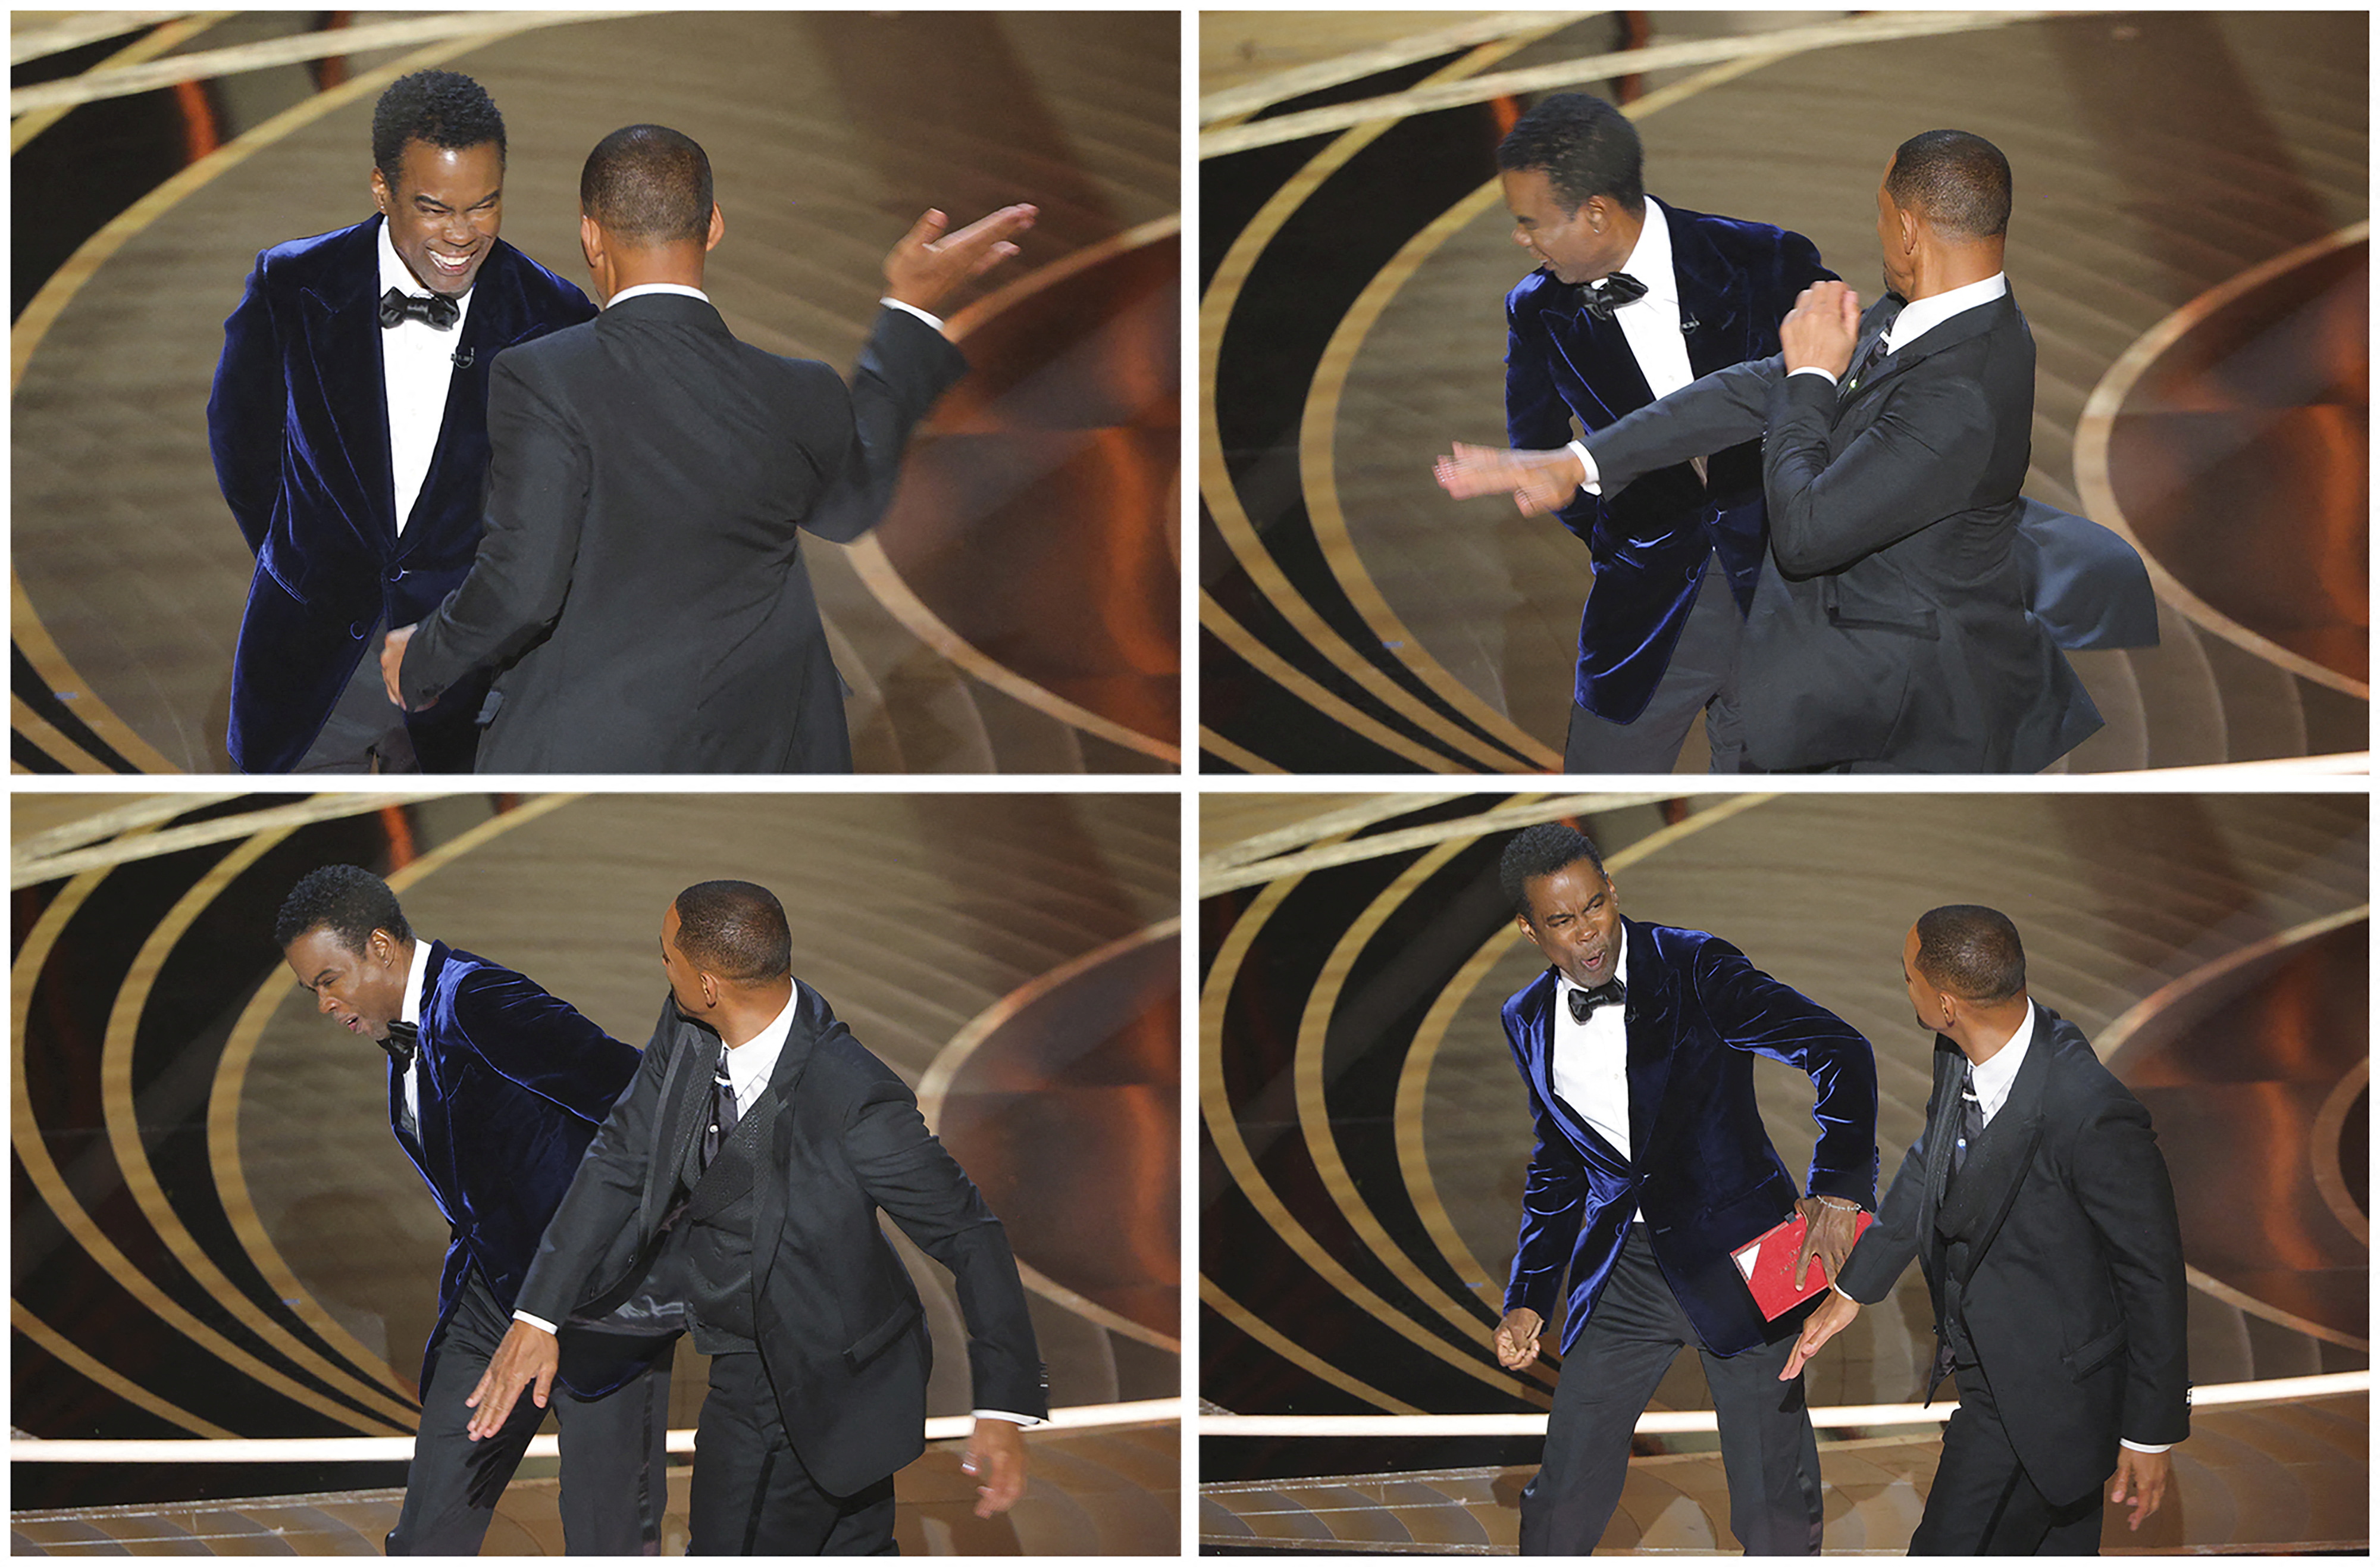 image Oscars: Will Smith punches presenter Chris Rock after wife joke